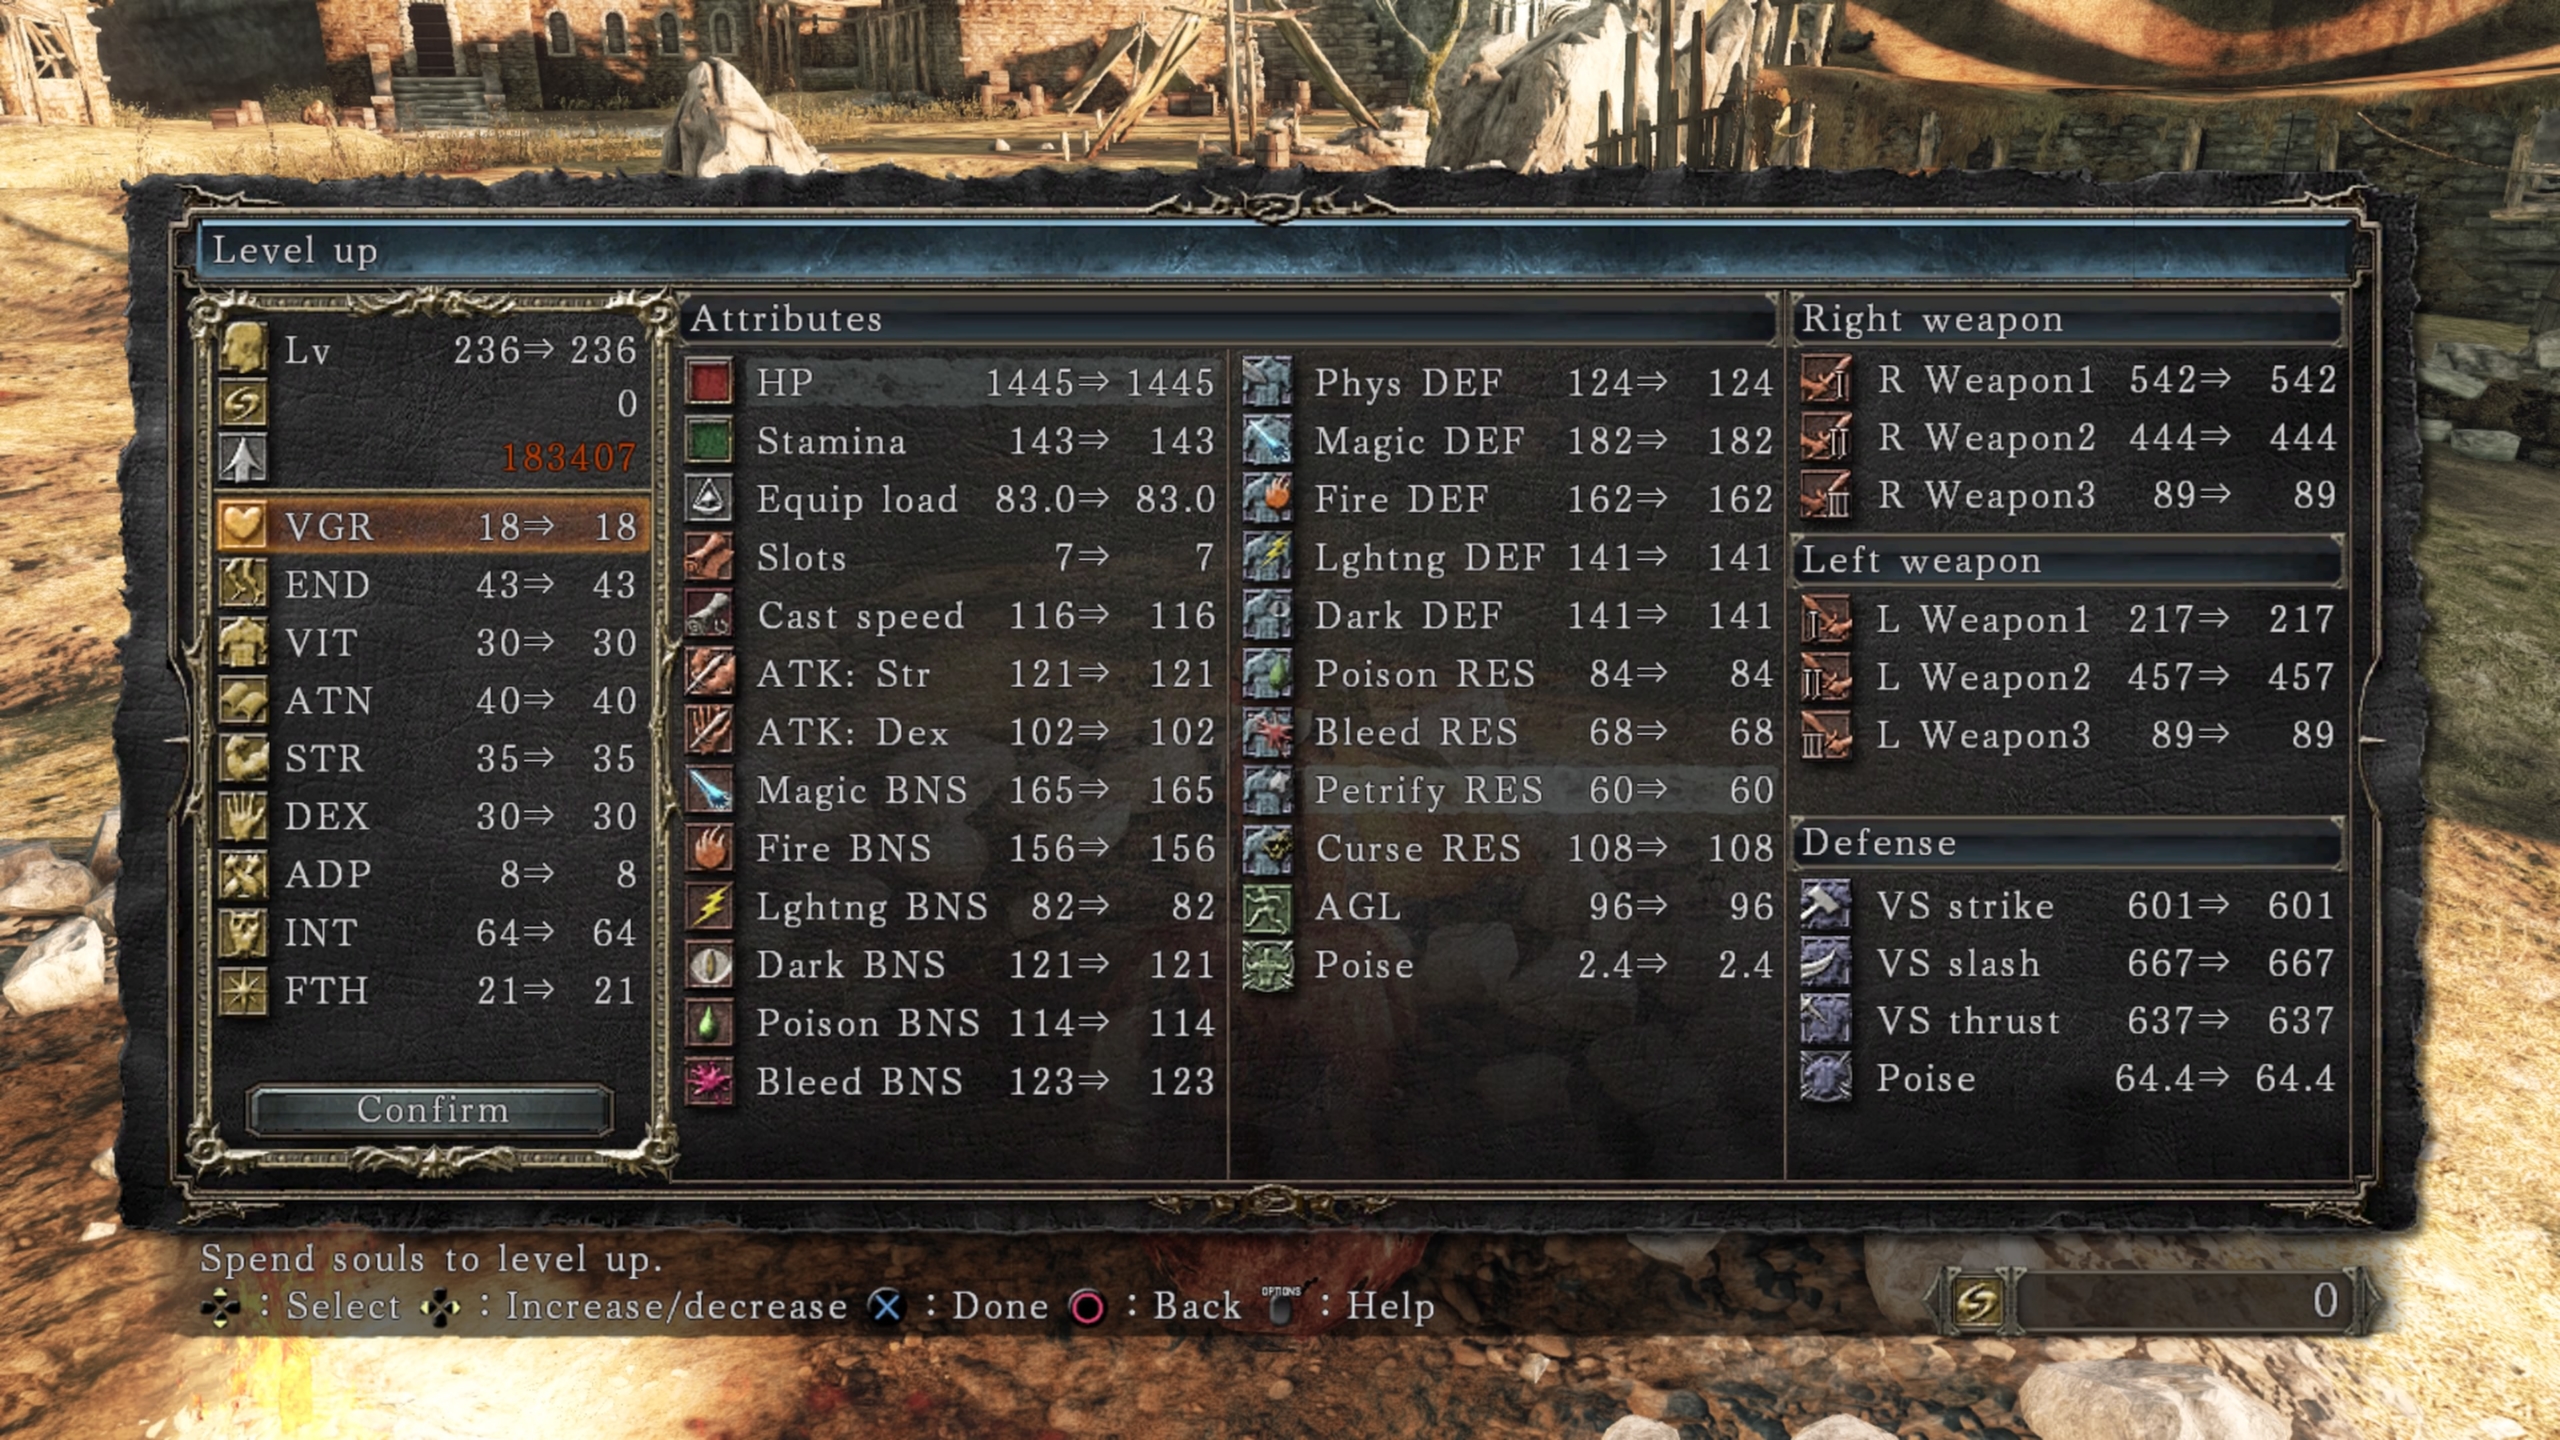 Dark Souls 2 Ring guide - where to find each ring, and their effects  explained